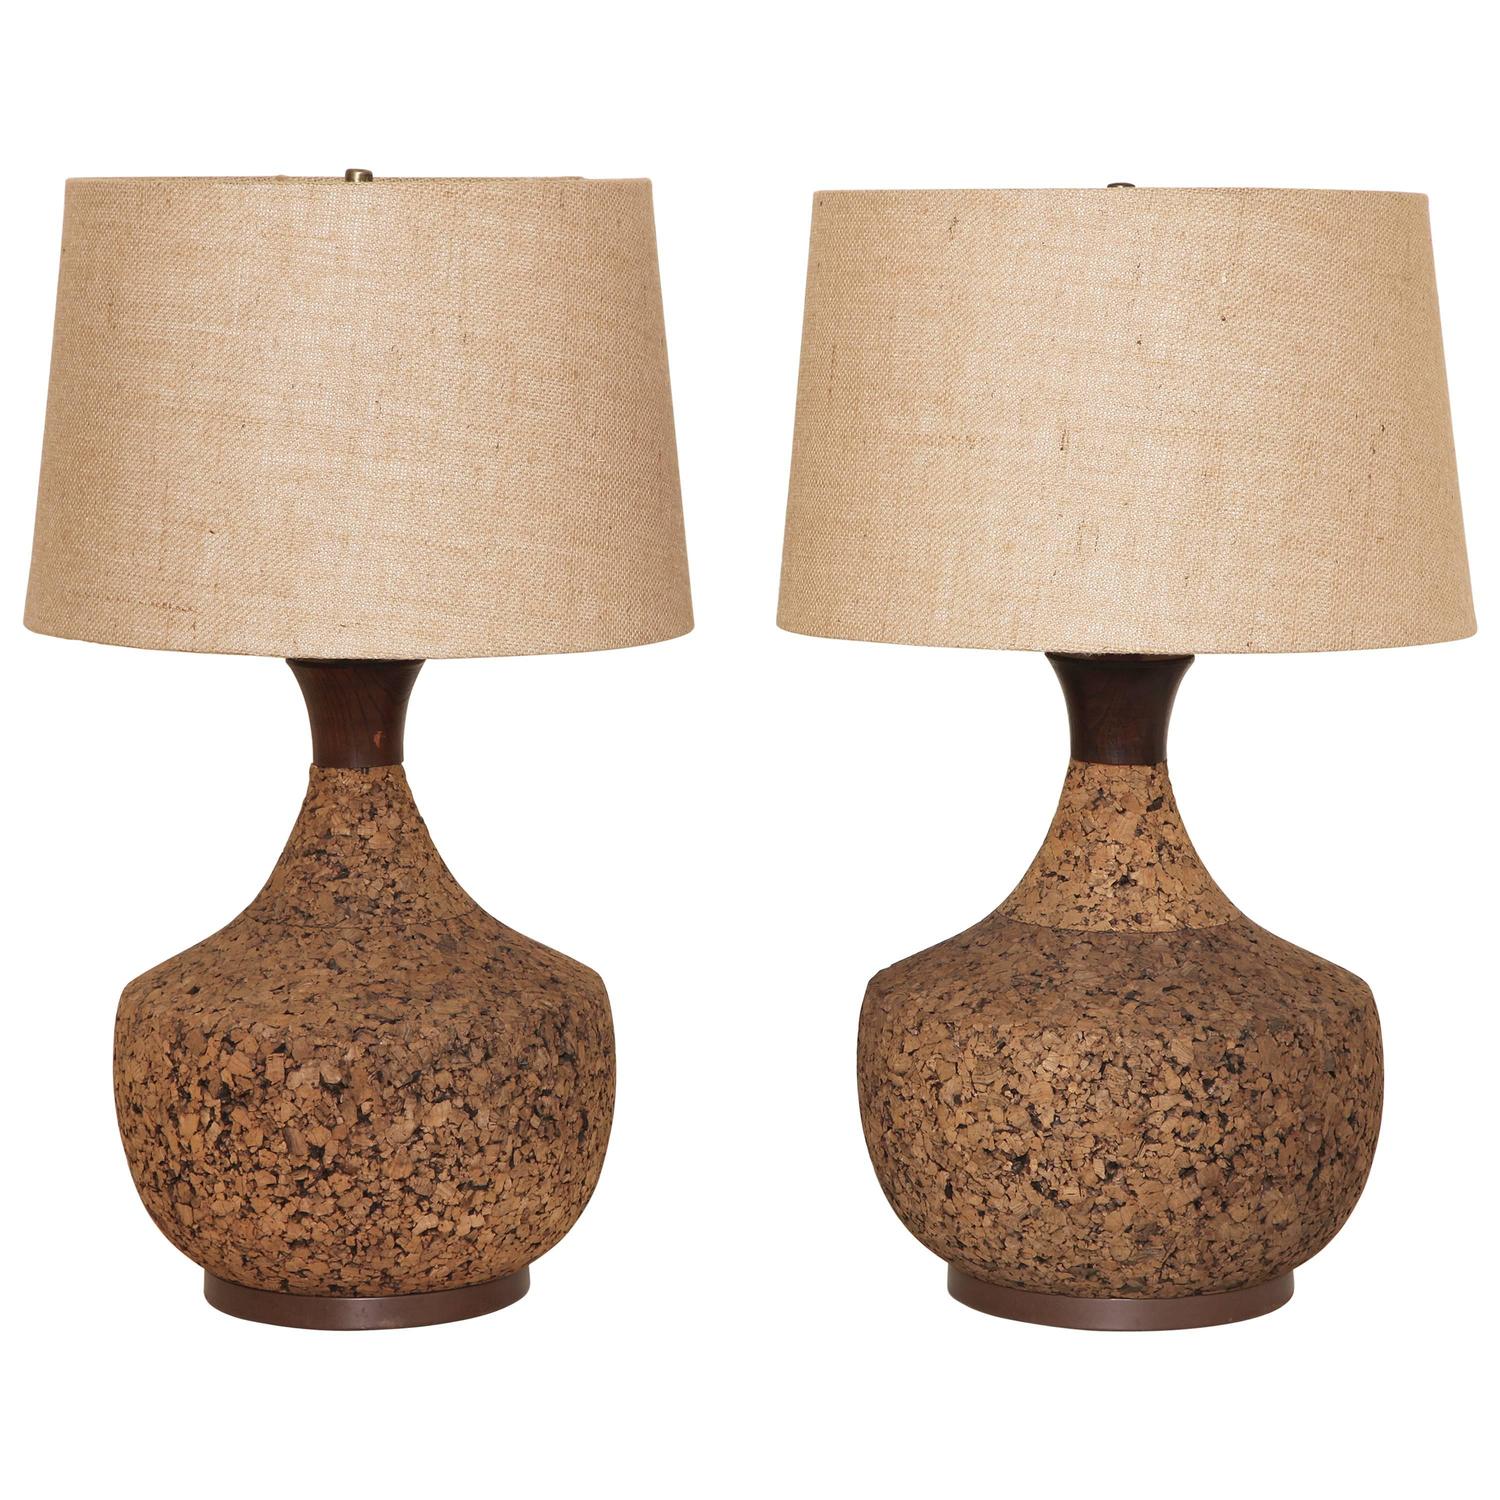 Pair of Mid-Century Modern Cork Lamps with Original Linen Shades at 1stdibs